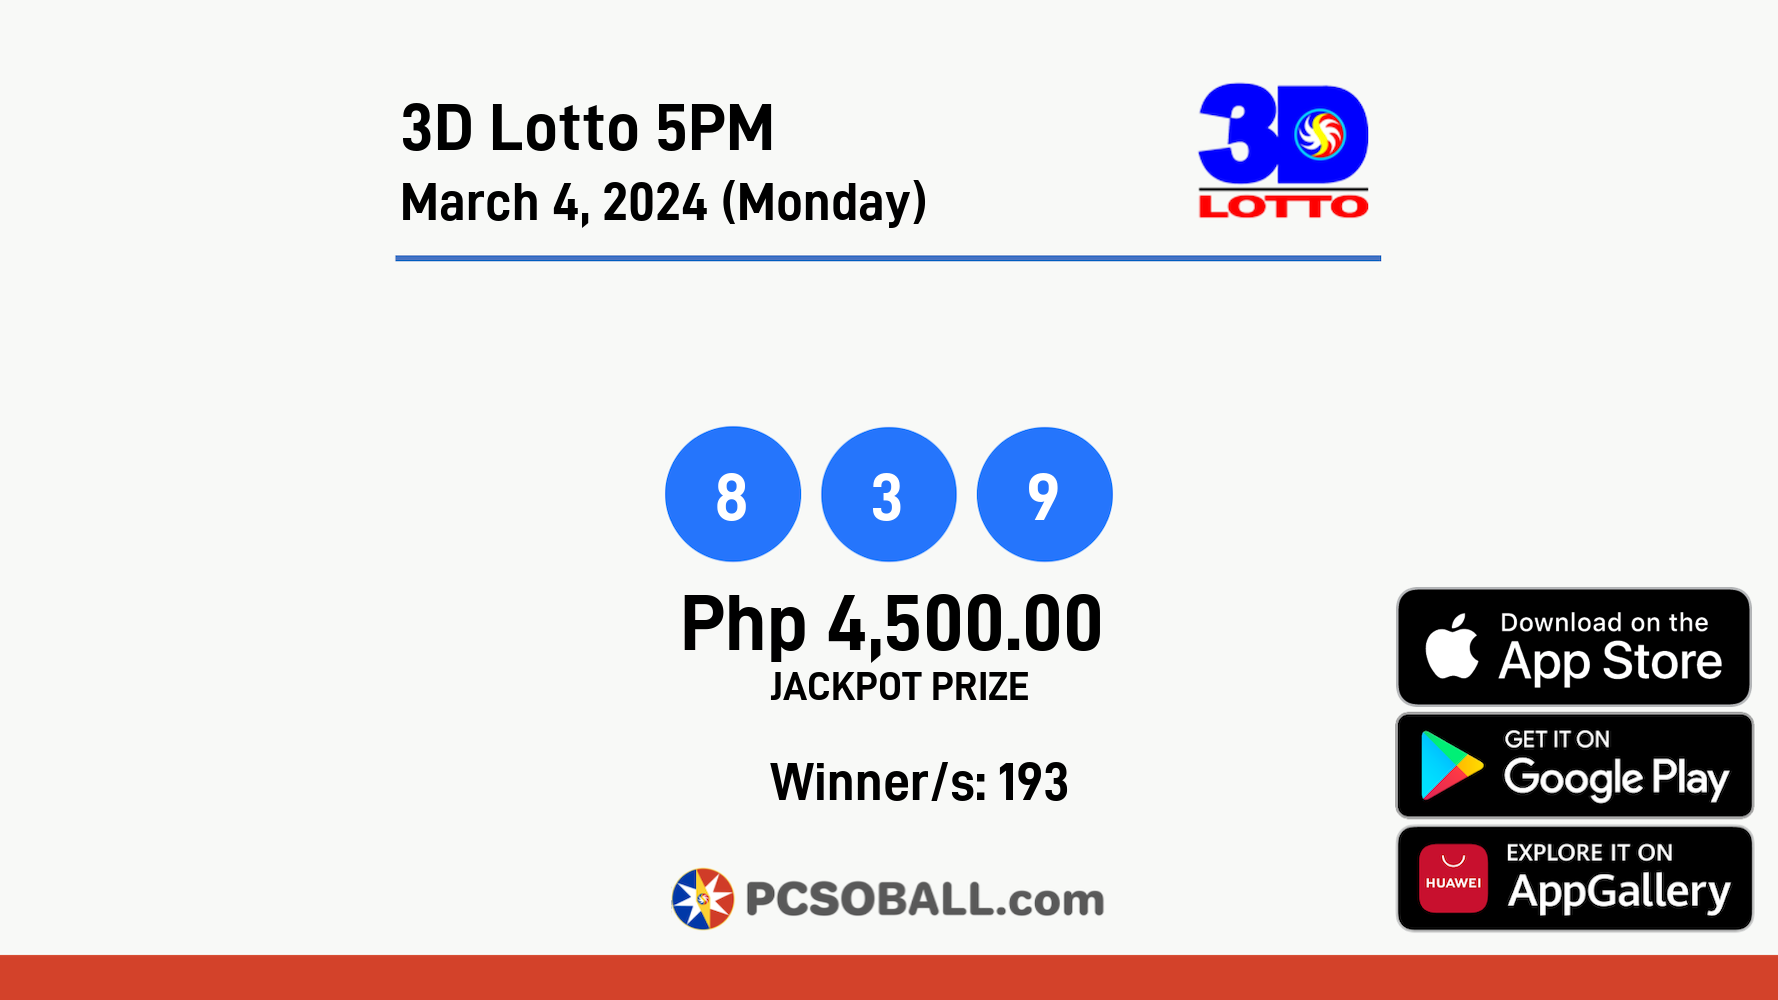 3D Lotto 5PM March 4, 2024 (Monday) Result